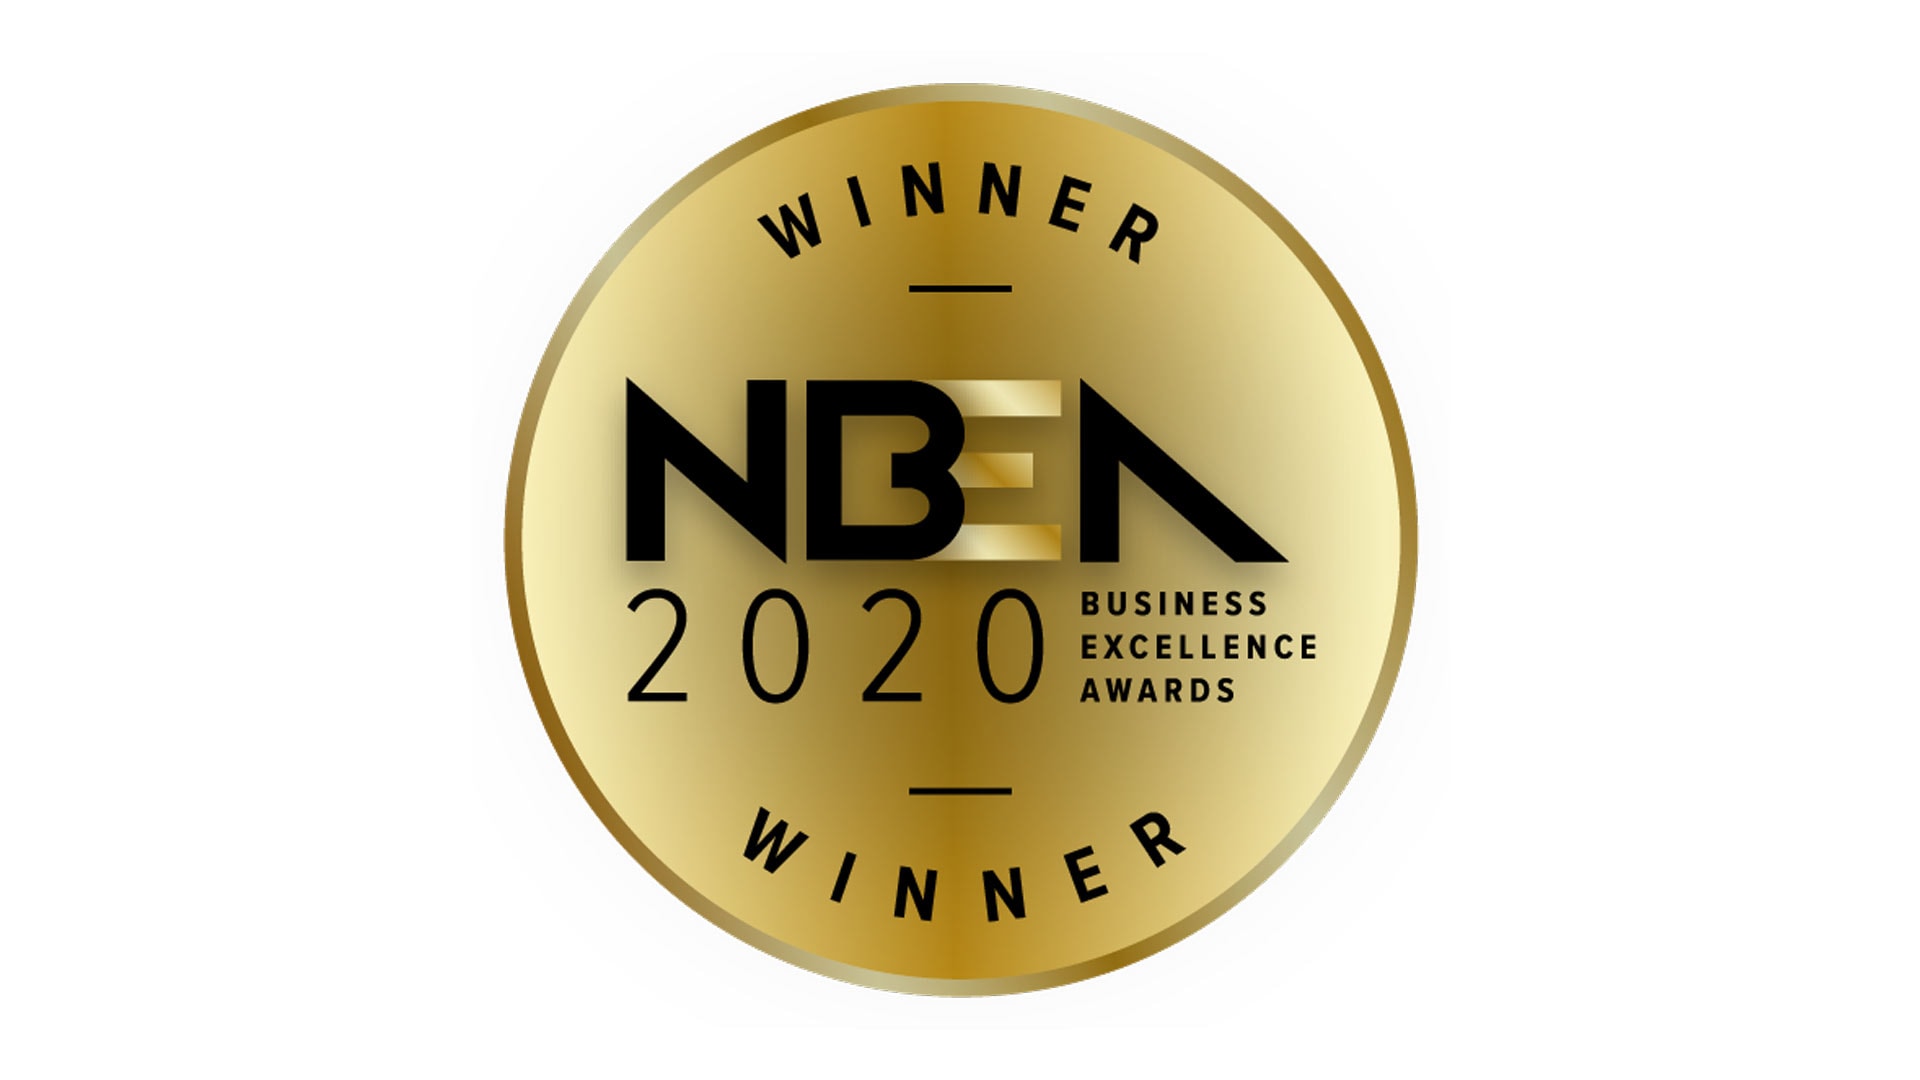 NBEA Business Excellence Awards